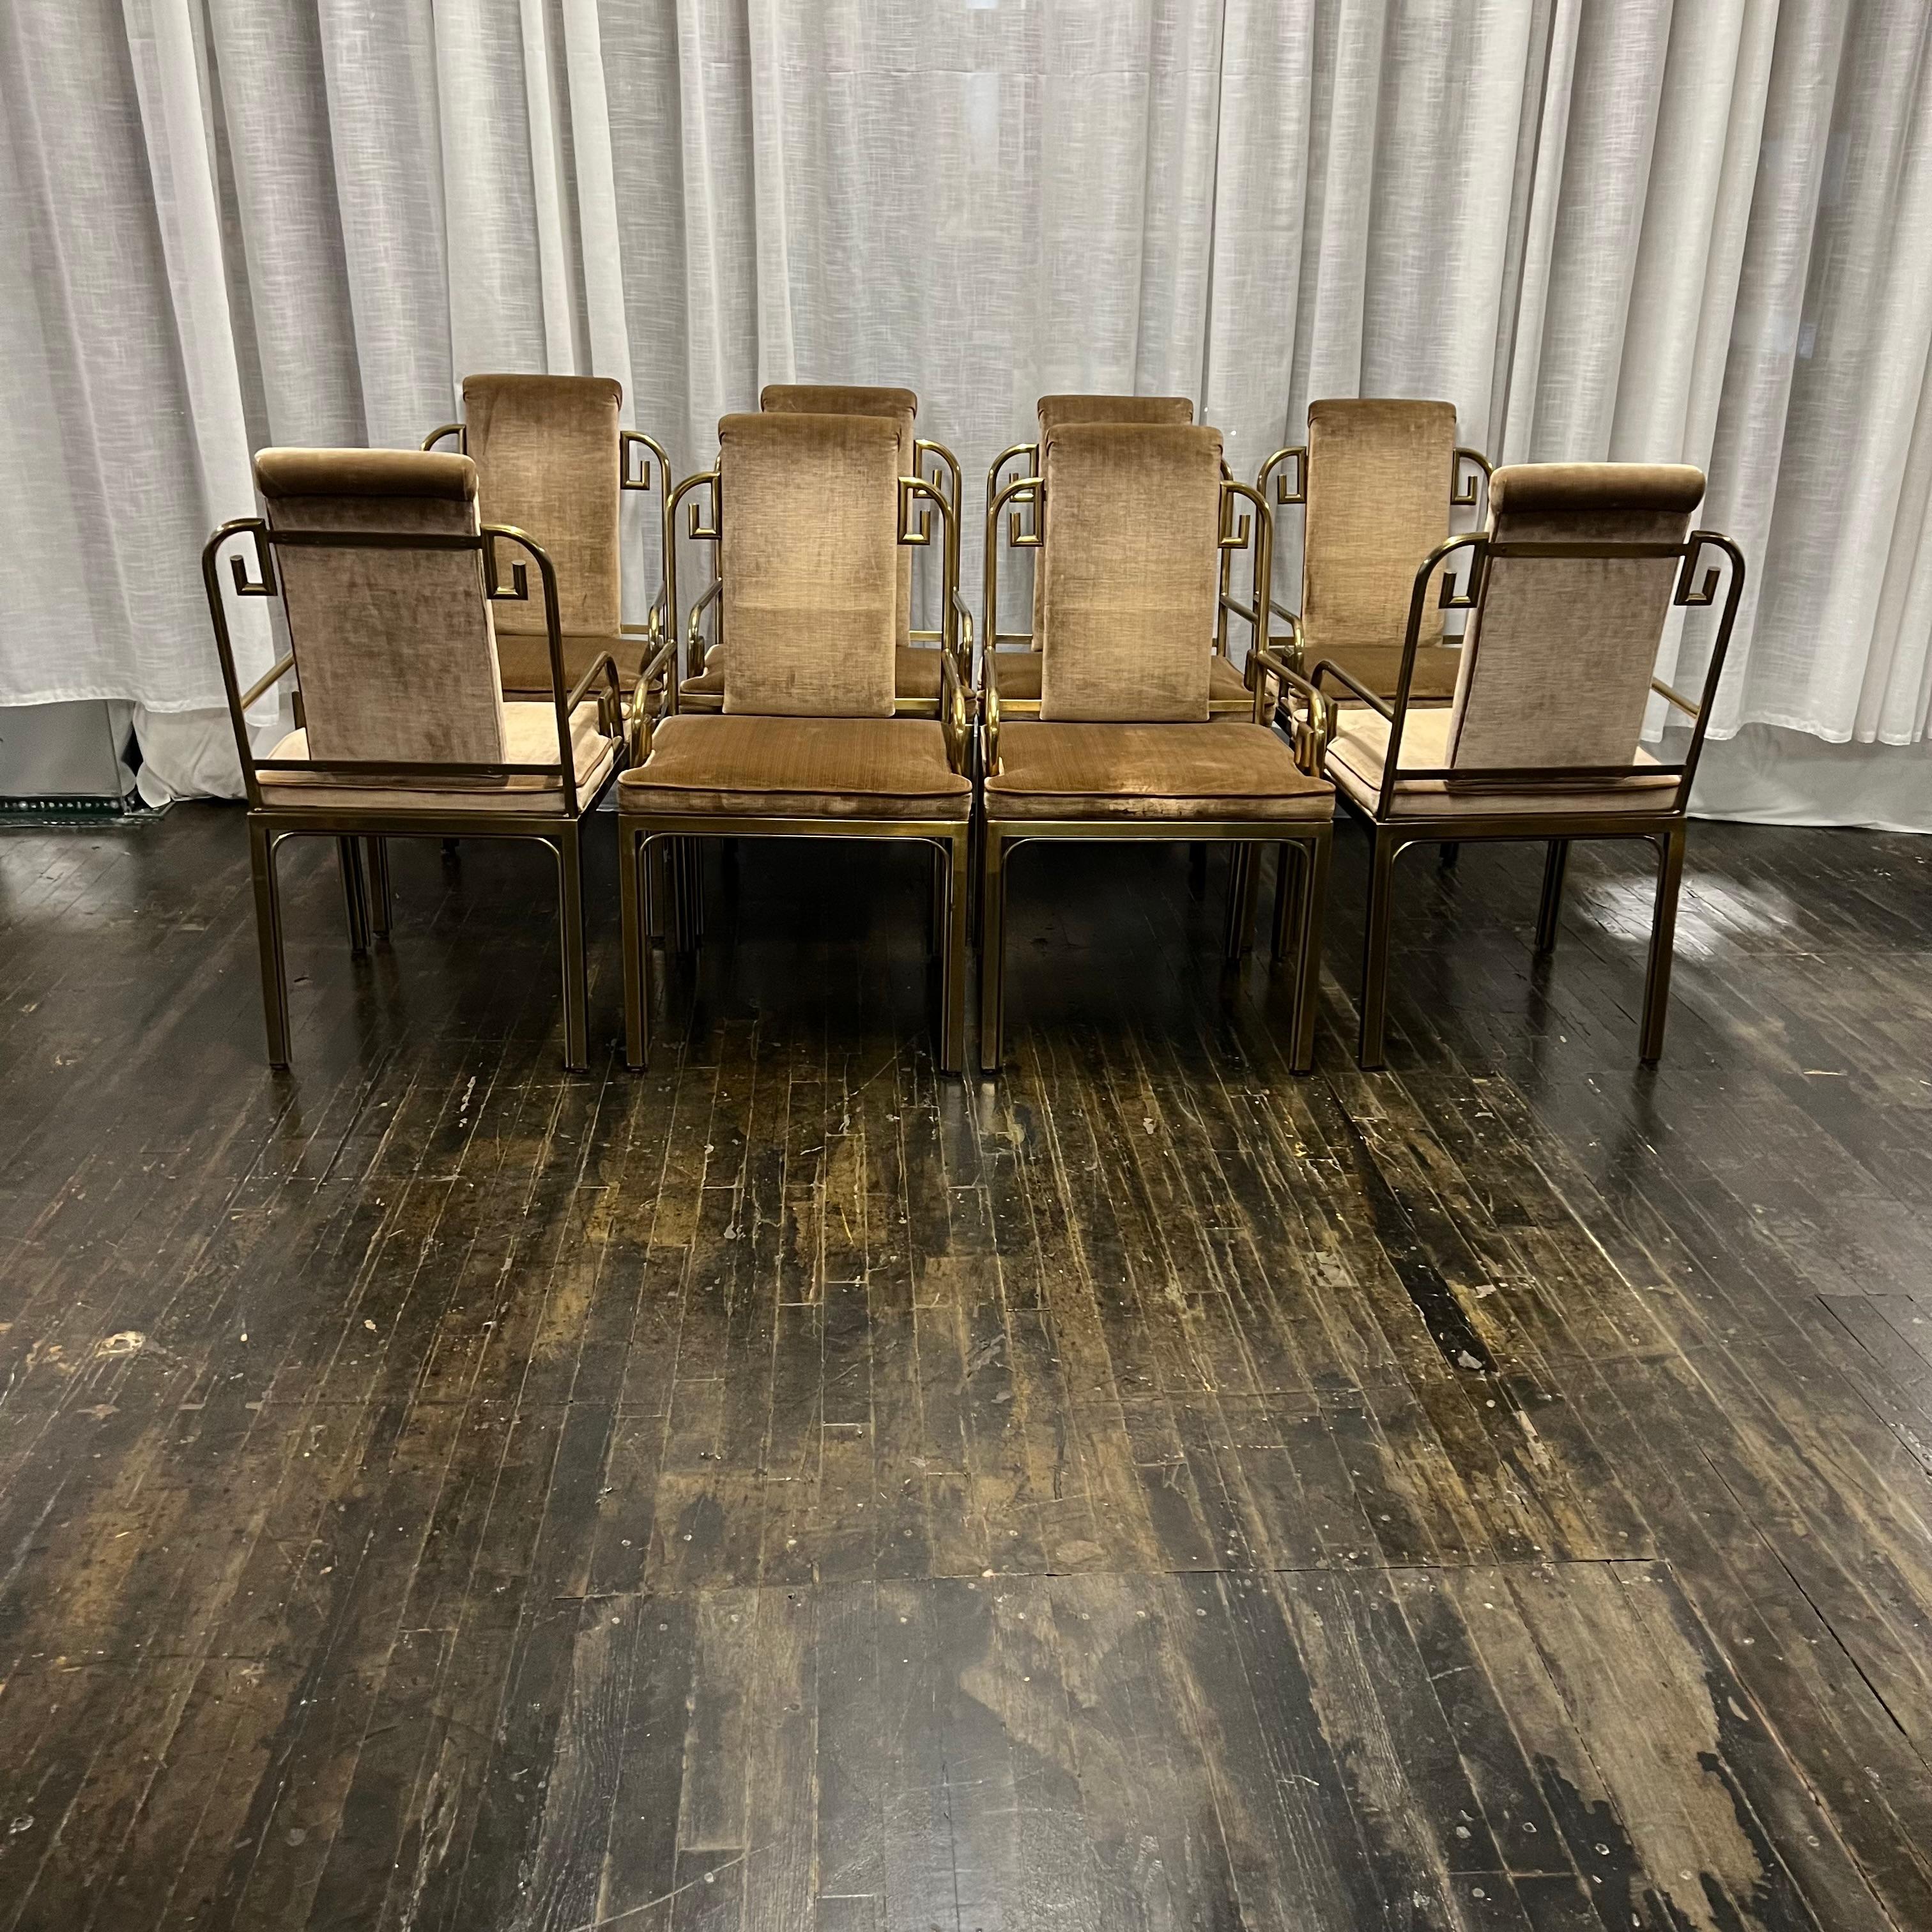 Set of 7 Mastercraft Hollywood Regency style Greek Key dining chairs with arms designed by Bernhard Rohne.  These chairs are from a North Shore estate.  They have a lovely patina and their velvet upholstery is best described as a cross between a